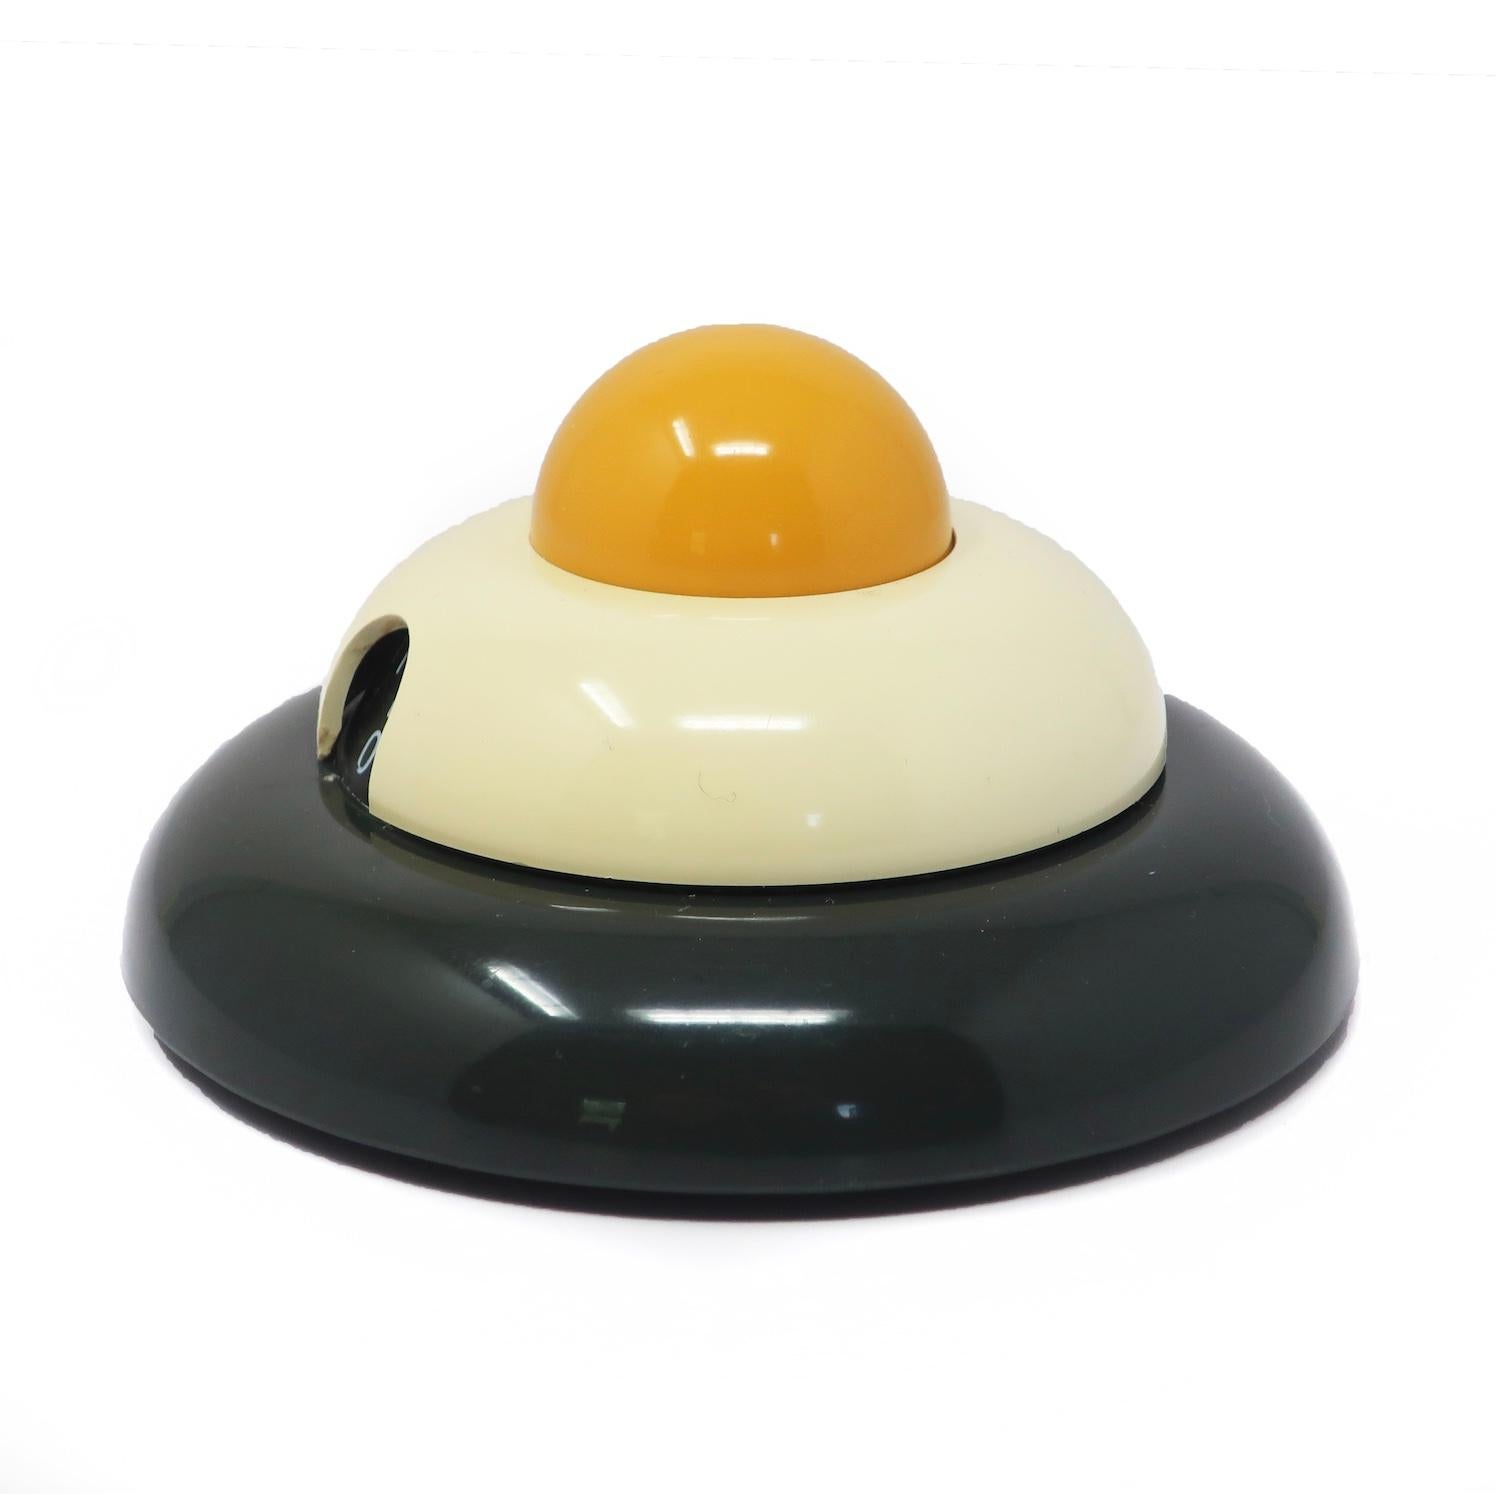 A whimsical Italian postmodern multicolor kitchen timer designed by Roberto Pezzetta for WikiDue.  Stacked dark gray, white and yellow discs give it a fun Memphis Milano-inspried take on an egg in a pan.  Runs for up to 60 minutes.

In very good